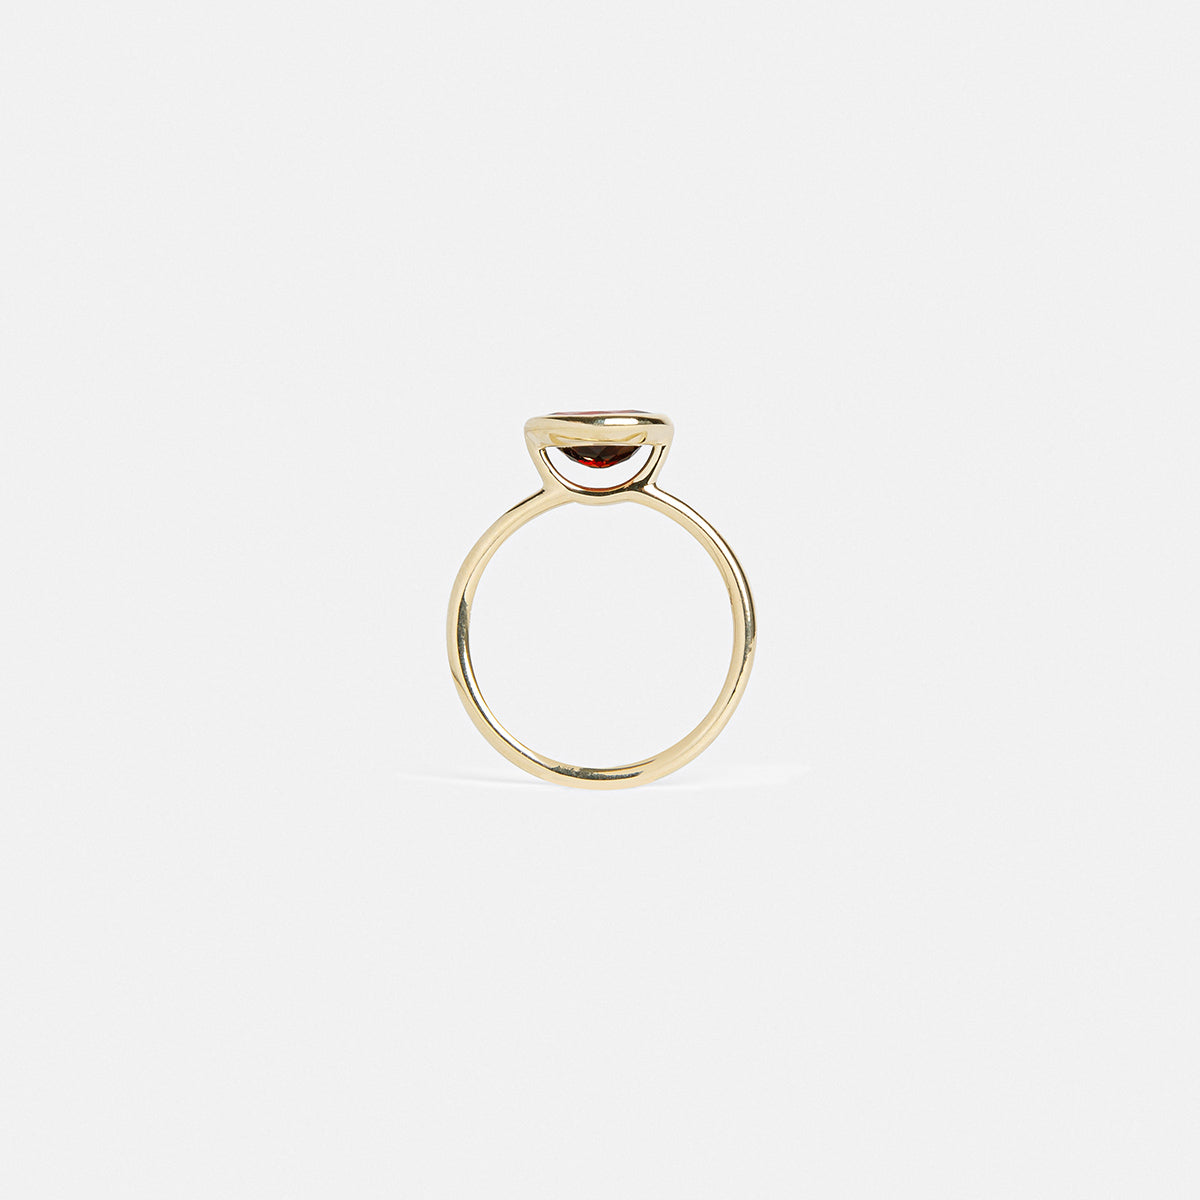 Lida Cool Ring in 14k Gold set with an oval cut garnet By SHW Fine Jewelry NYC